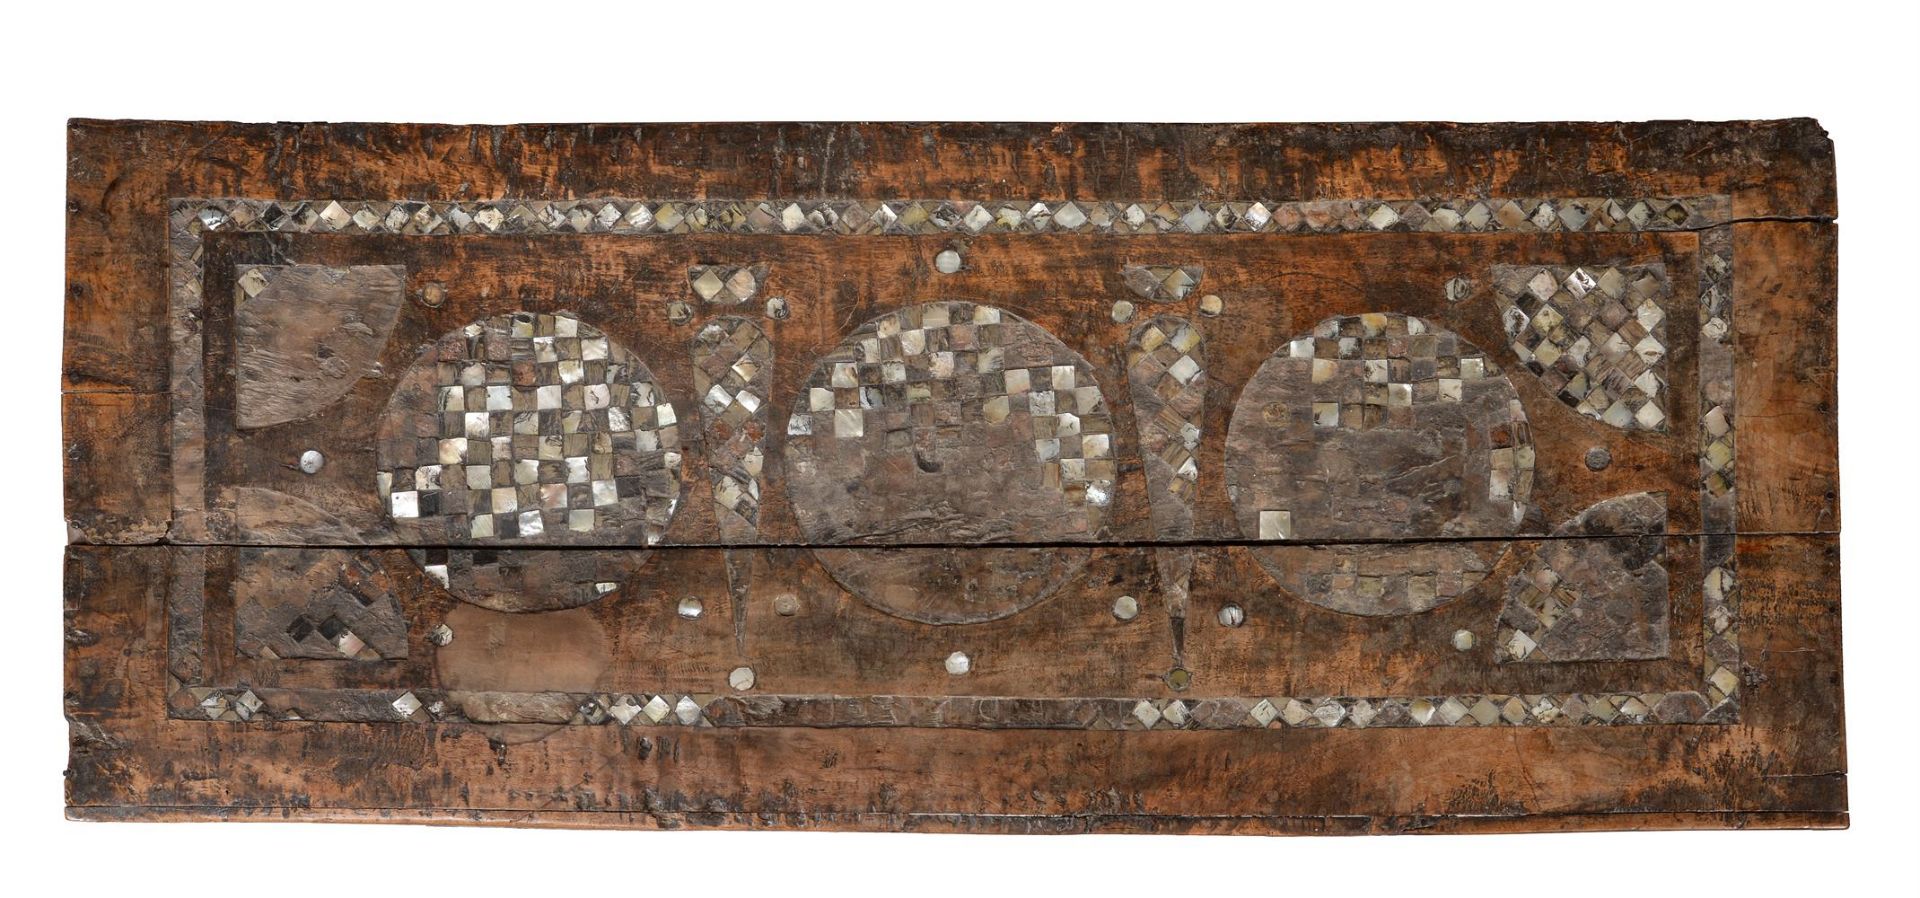 Y AN OTTOMAN MOTHER OF PEARL AND TORTOISESHELL INLAID WOODEN CHEST, 19TH CENTURY OR EARLIER - Image 3 of 4